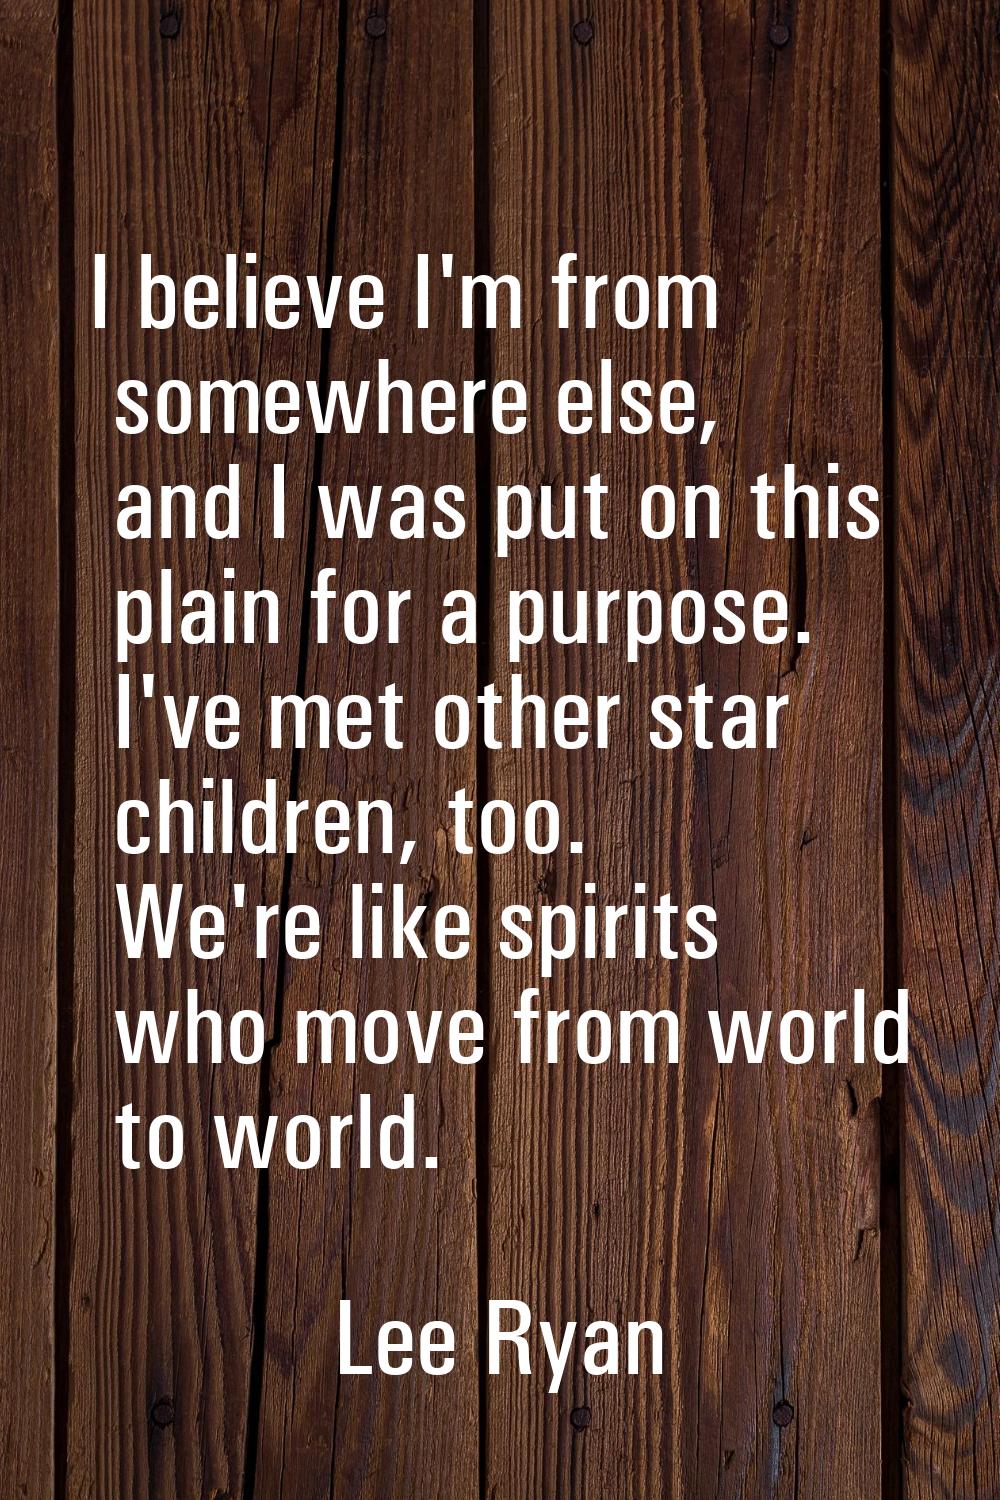 I believe I'm from somewhere else, and I was put on this plain for a purpose. I've met other star c